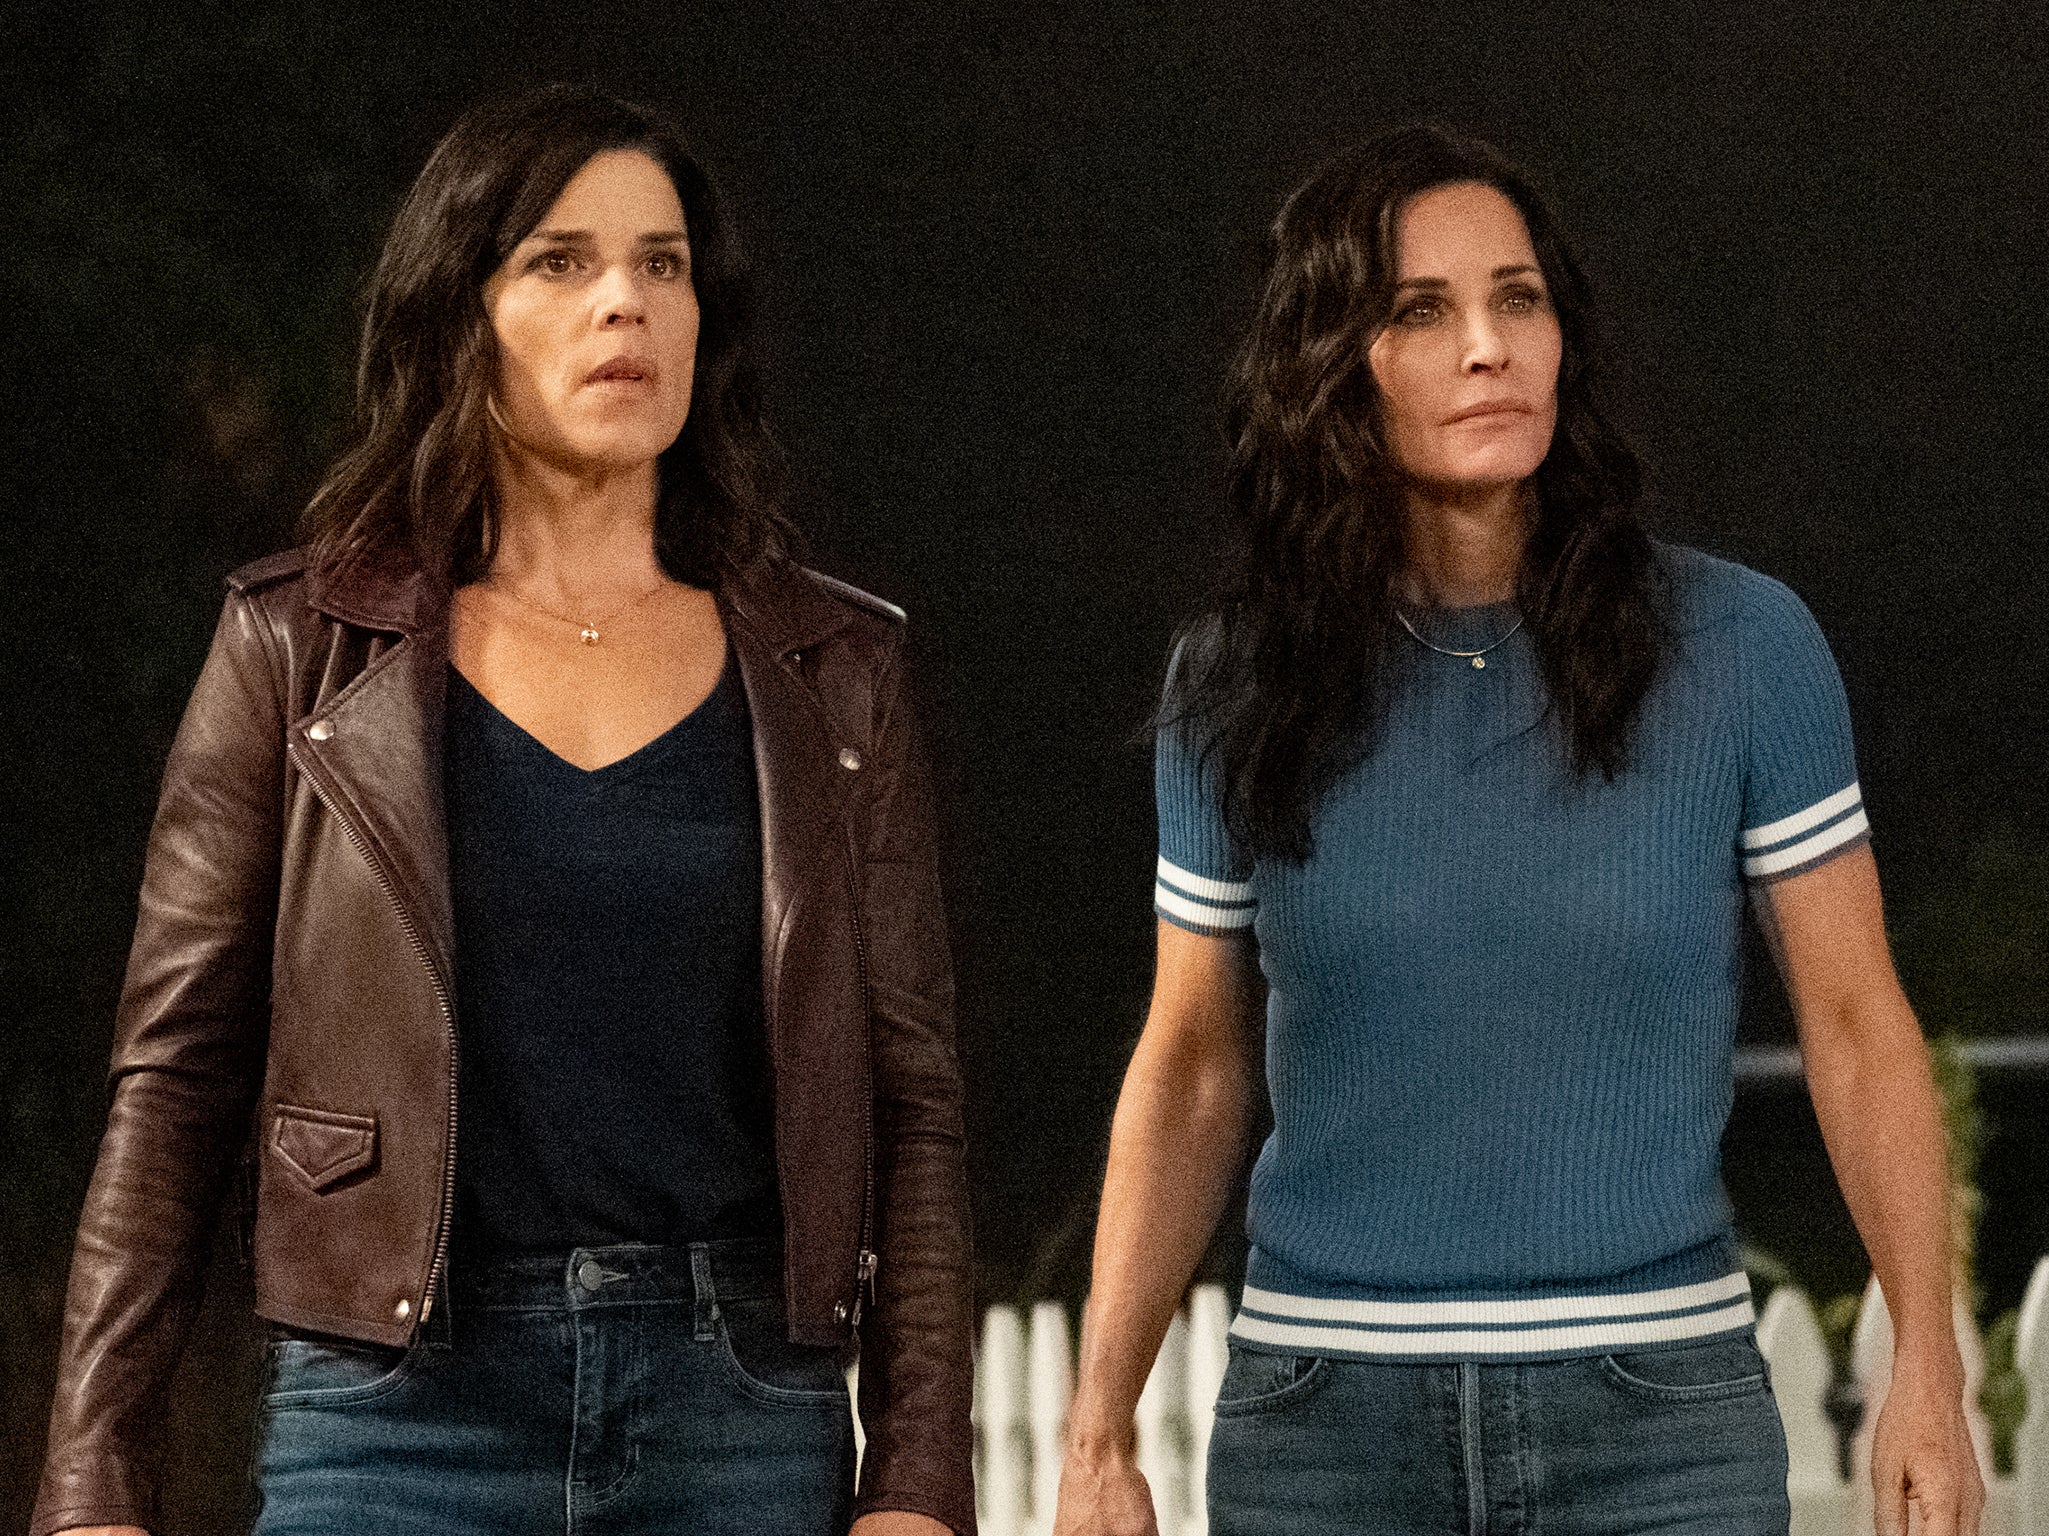 Neve Campbell and Courteney Cox in next month’s ‘Scream'